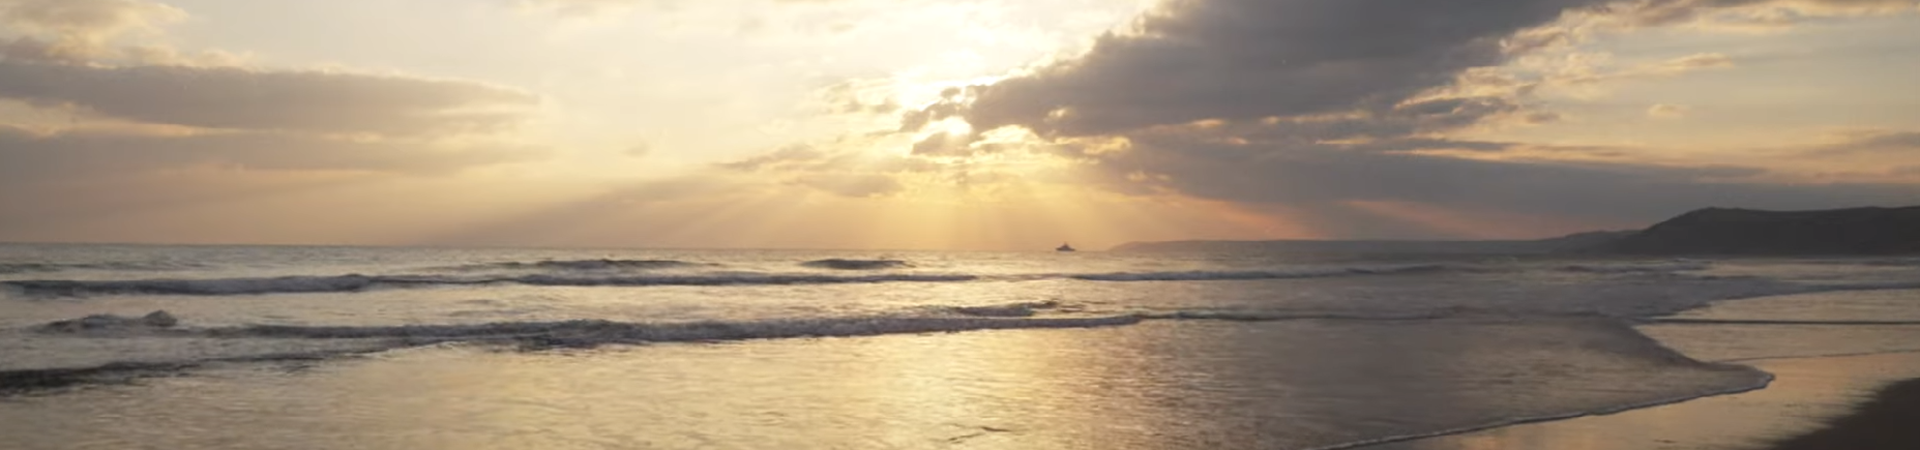 A holiday by the coast: our latest video story